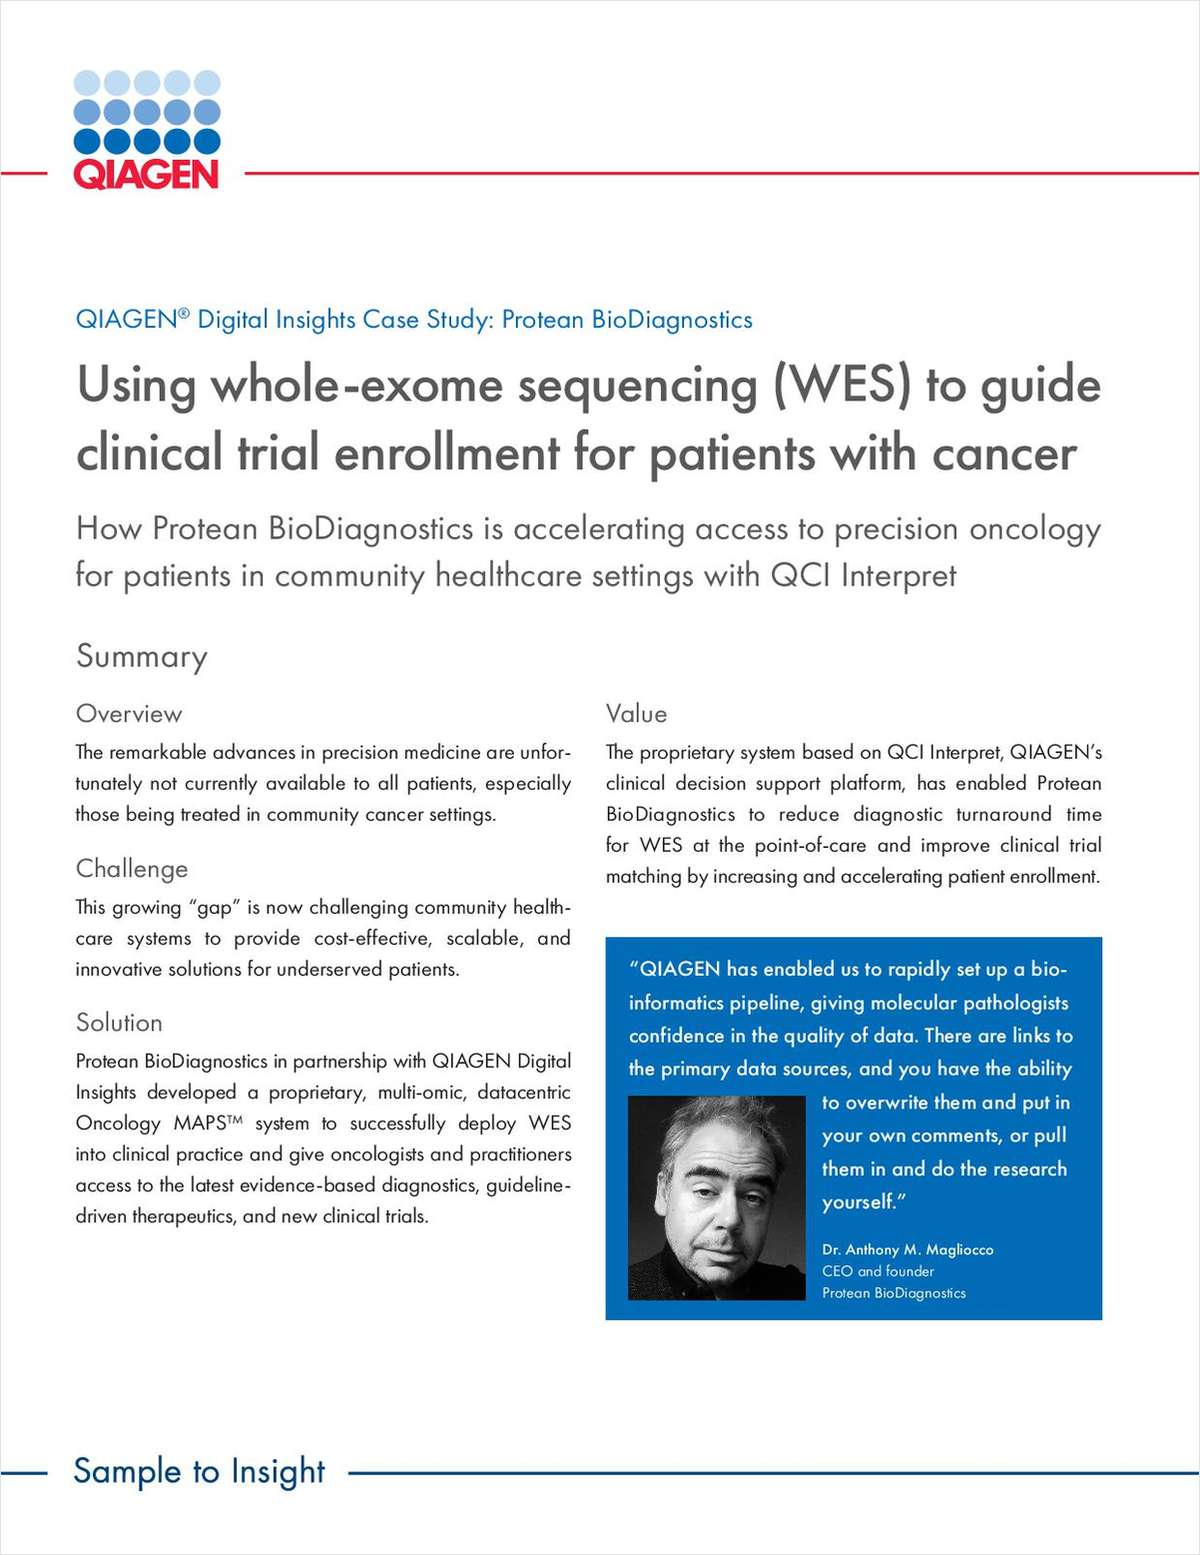 Using Whole-Exome Sequencing to Guide Clinical Trial Enrollment for Patients With Cancer